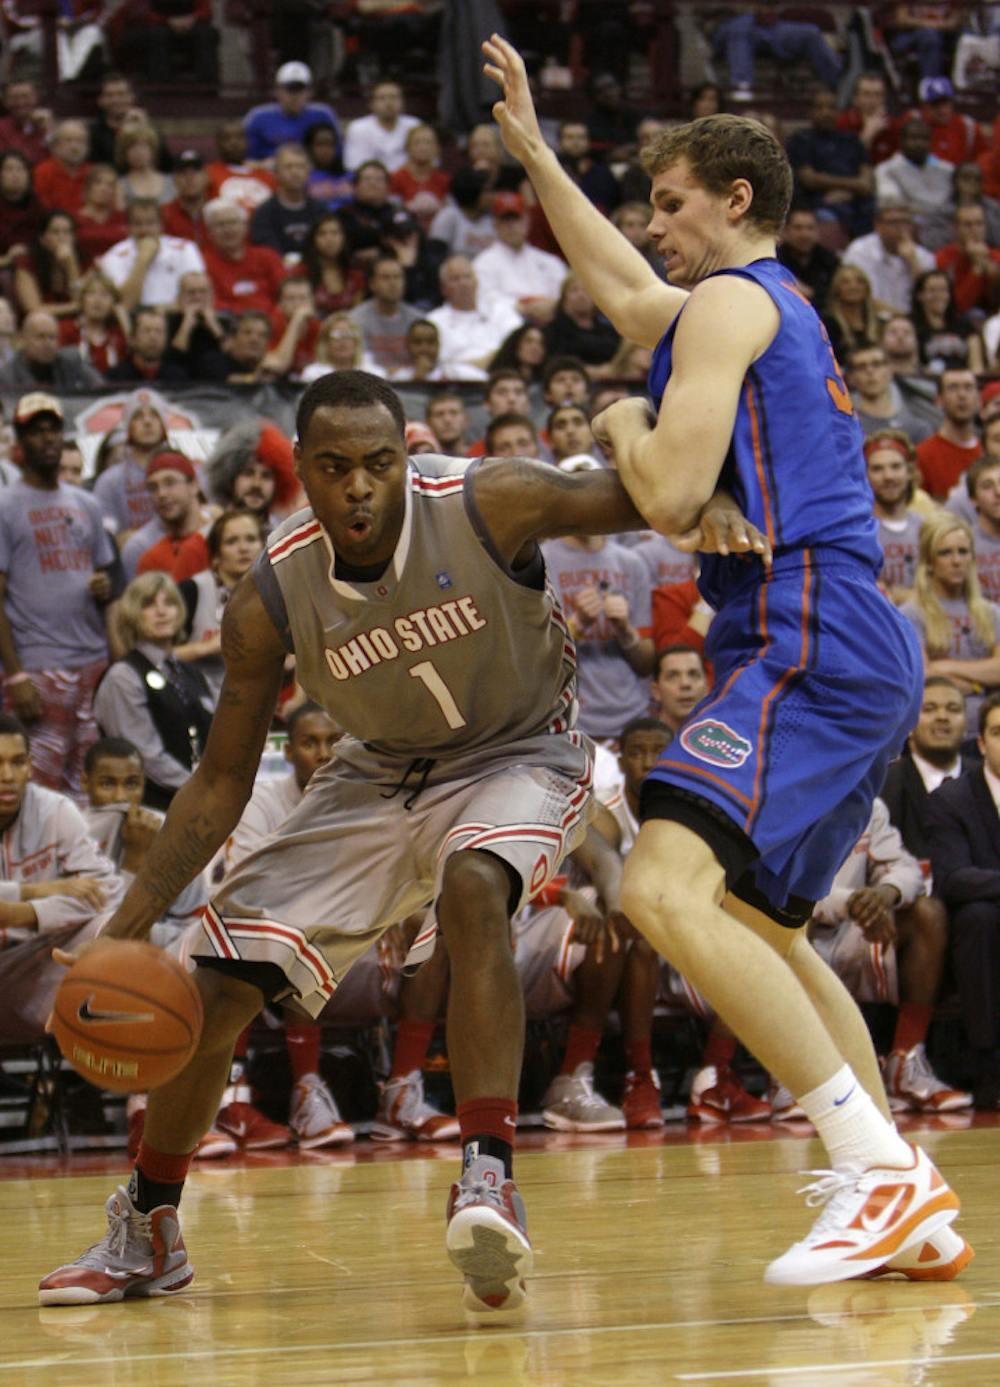 <p>Ohio State and forward Deshaun Thomas, who finished with 15
points and six rebounds, defeated Florida, 81-74, on Tuesday in a
matchup of top-10 teams.</p>